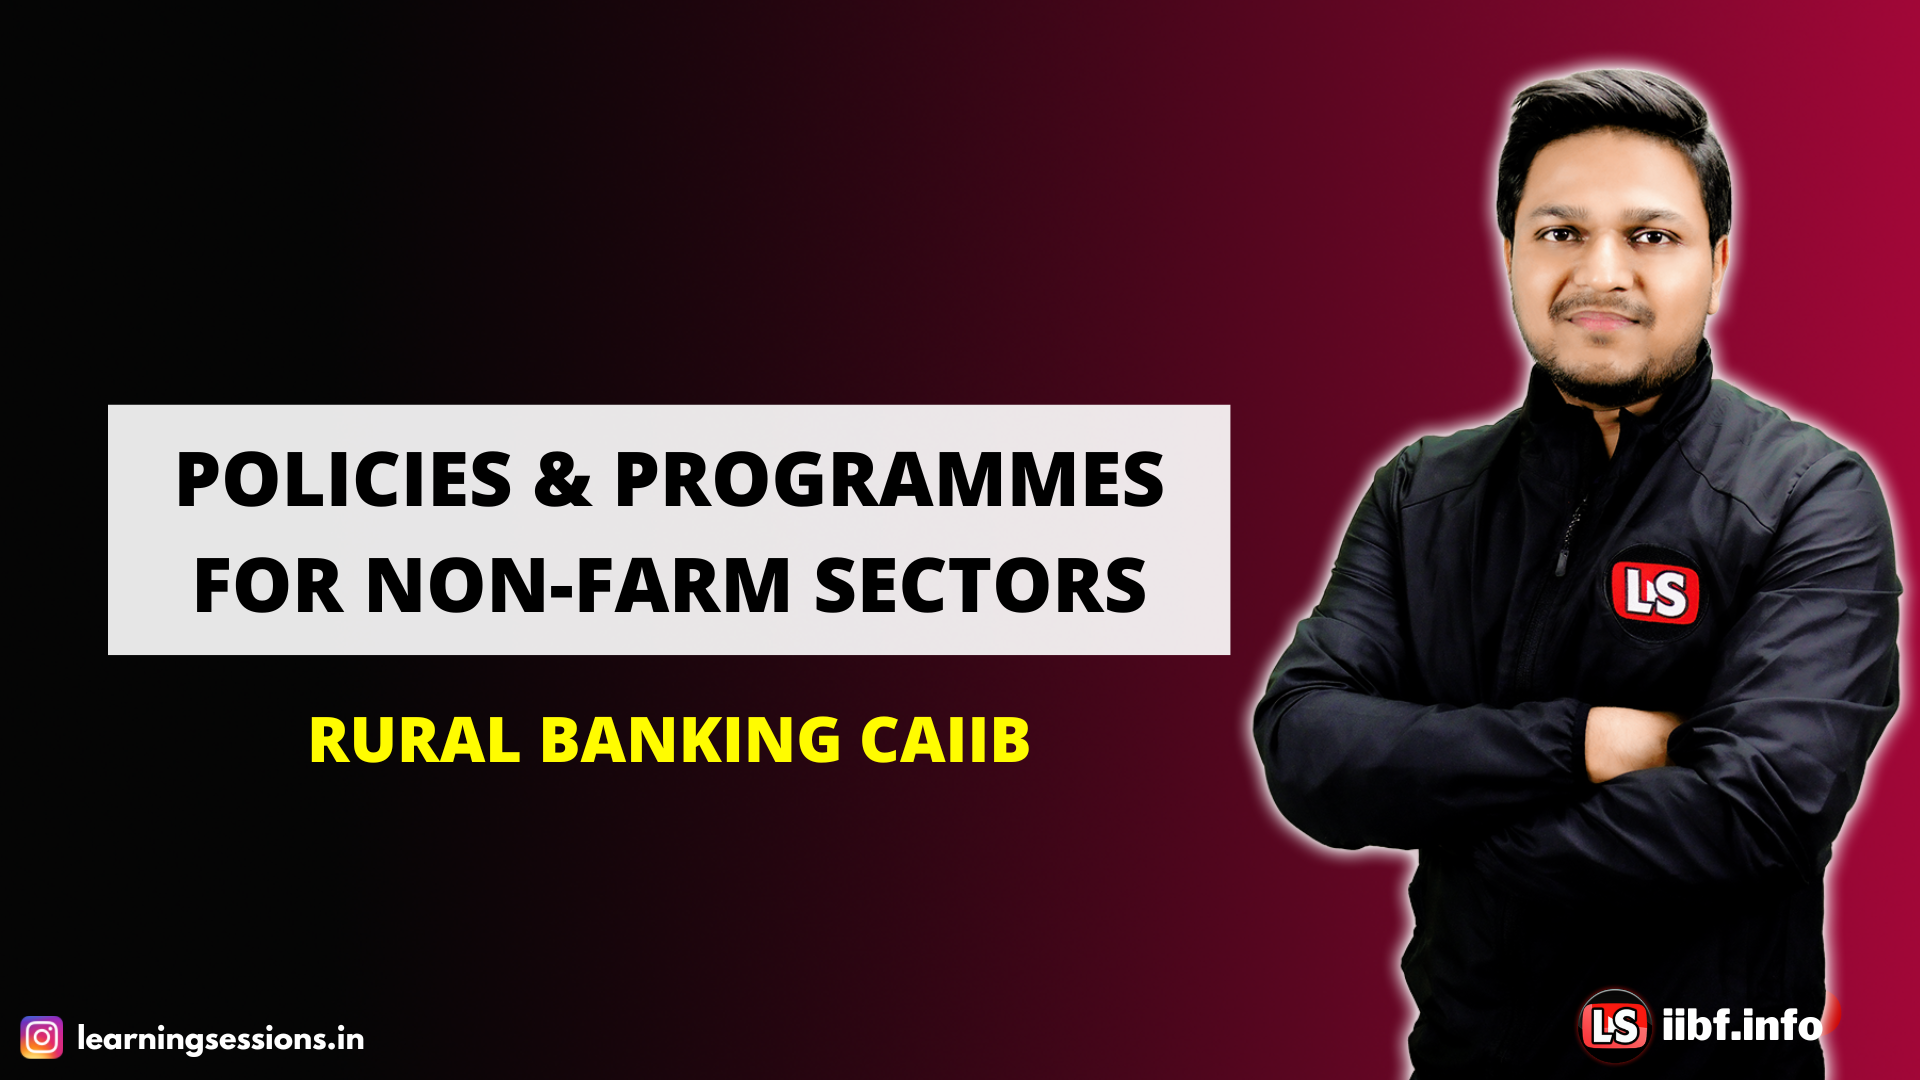 RURAL BANKING CAIIB 2022 | GOVT. POLICIES & PROGRAMMES FOR NON-FARM SECTORS | NATIONAL MISSION FOR SUSTAINABLE AGRICULTURE (NMSA)